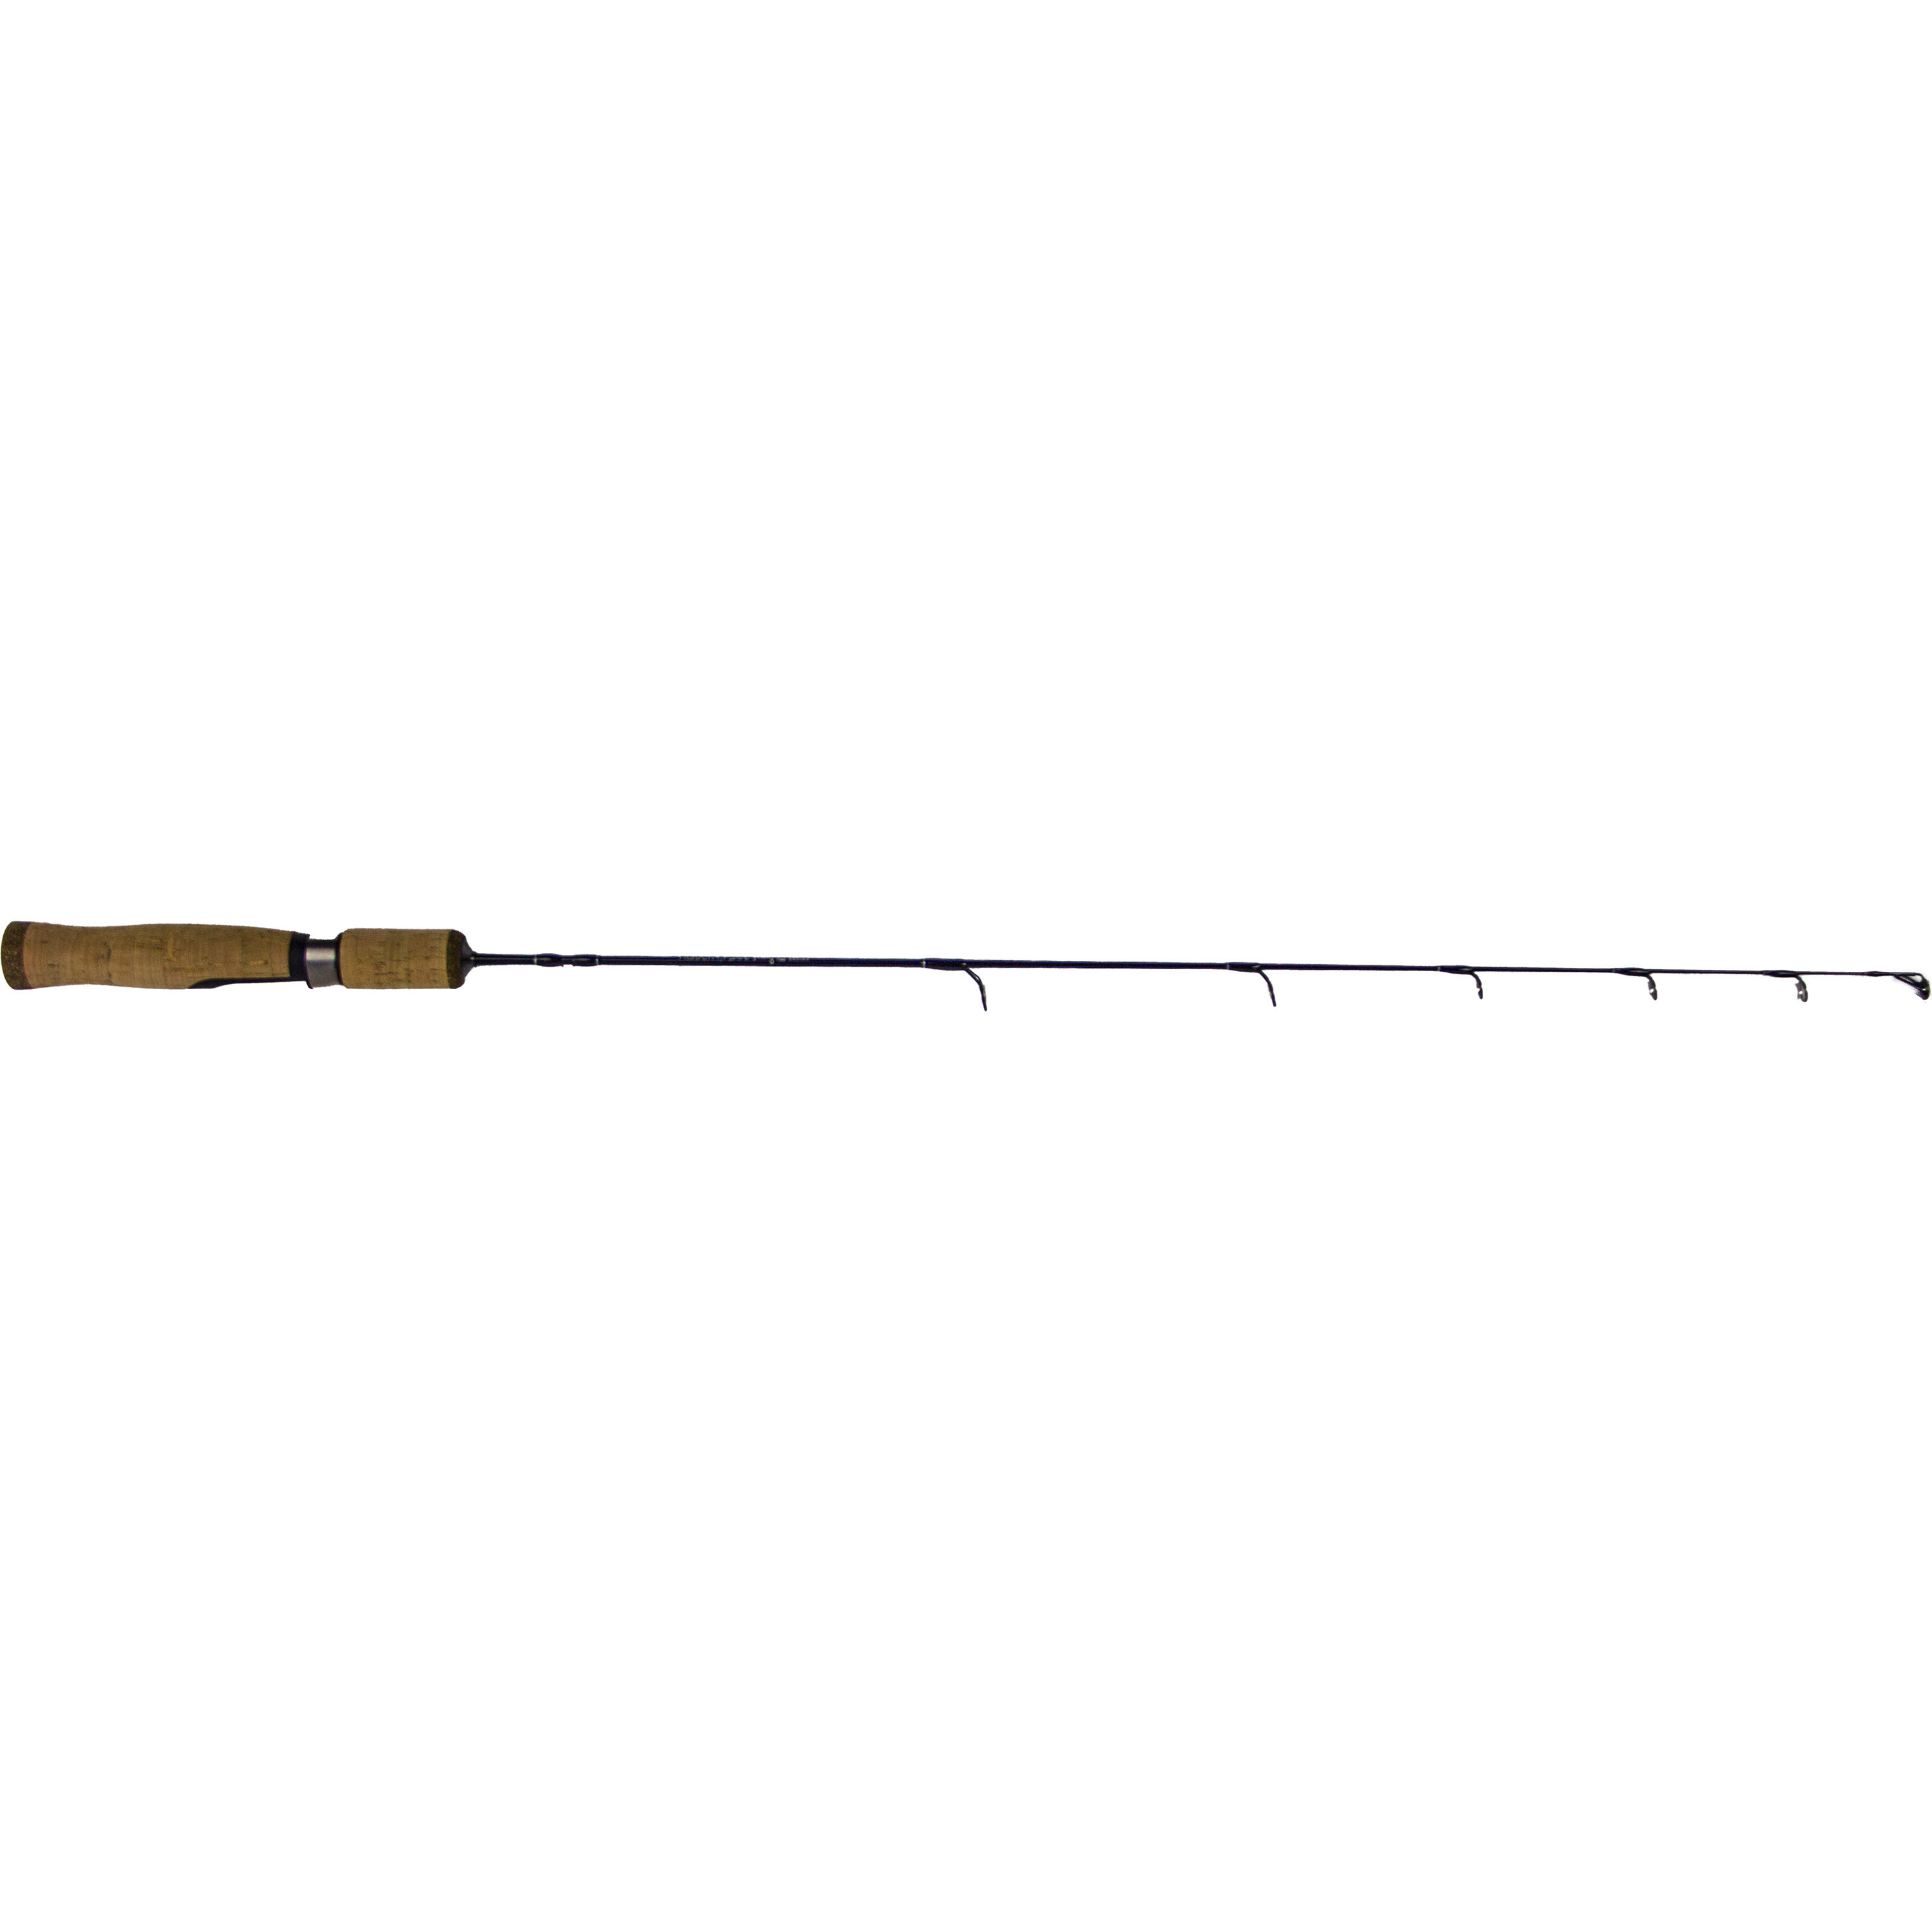 St. Croix® Mojo Ice Spinning Rods